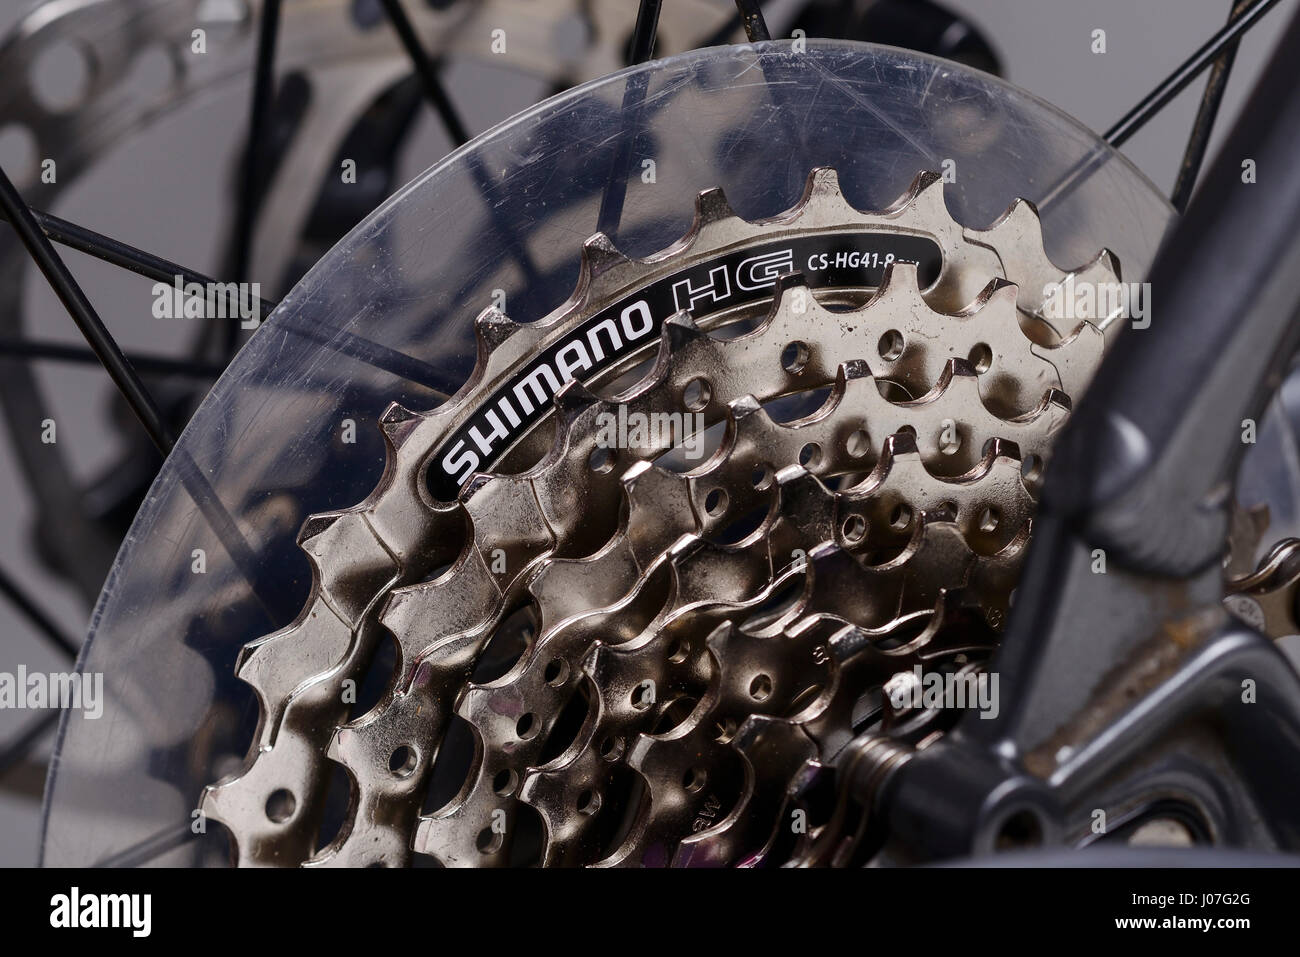 Close up of a Shimano gear cassette on a bicycle. Stock Photo